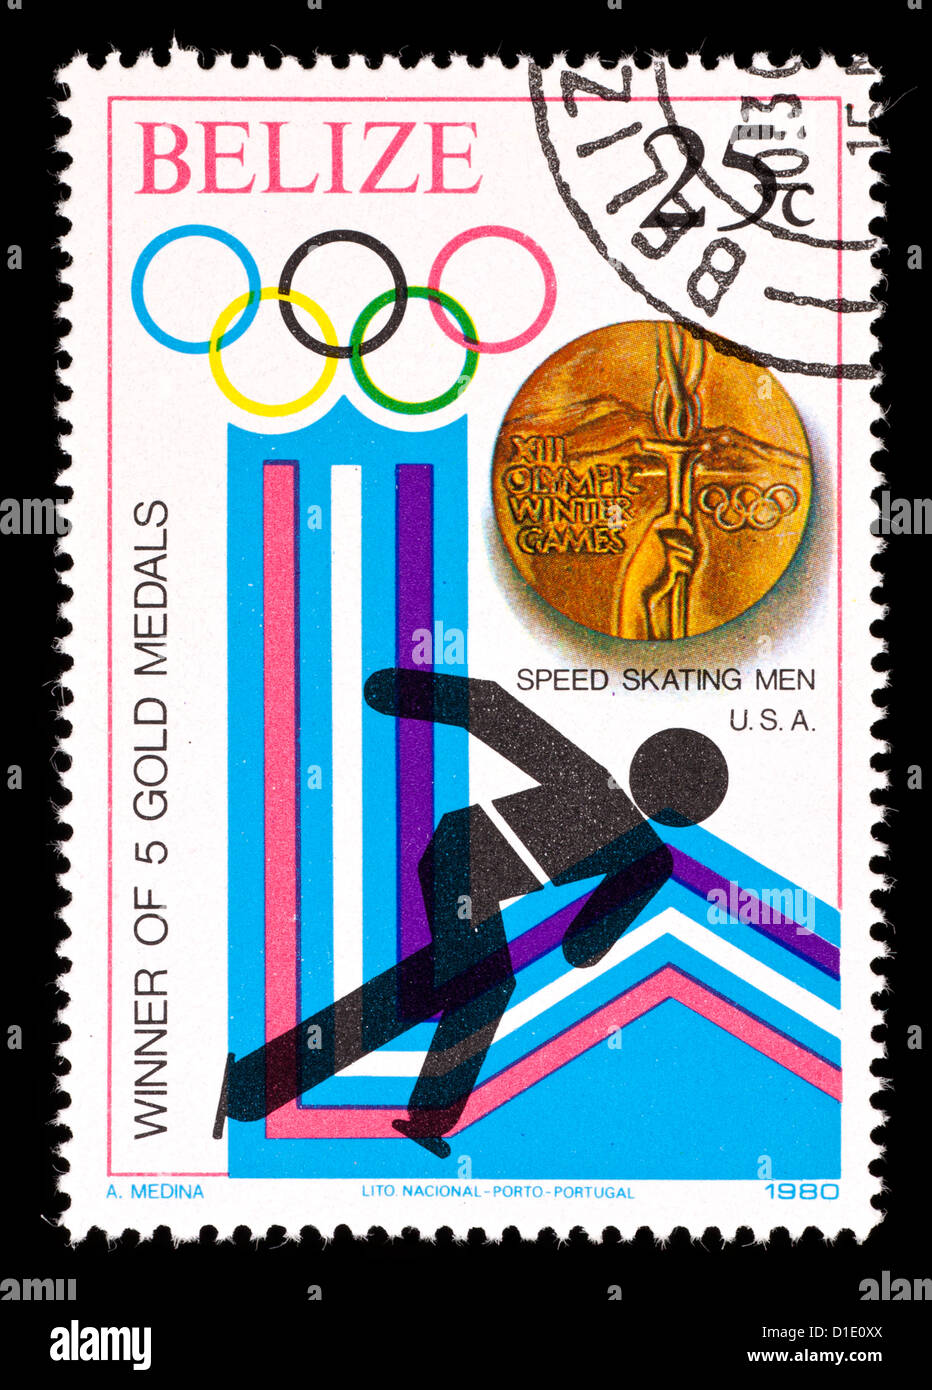 Postage stamp from Belize depicting a speed skater and gold medal, issued for the th 1976 Winter Olympic Games Stock Photo